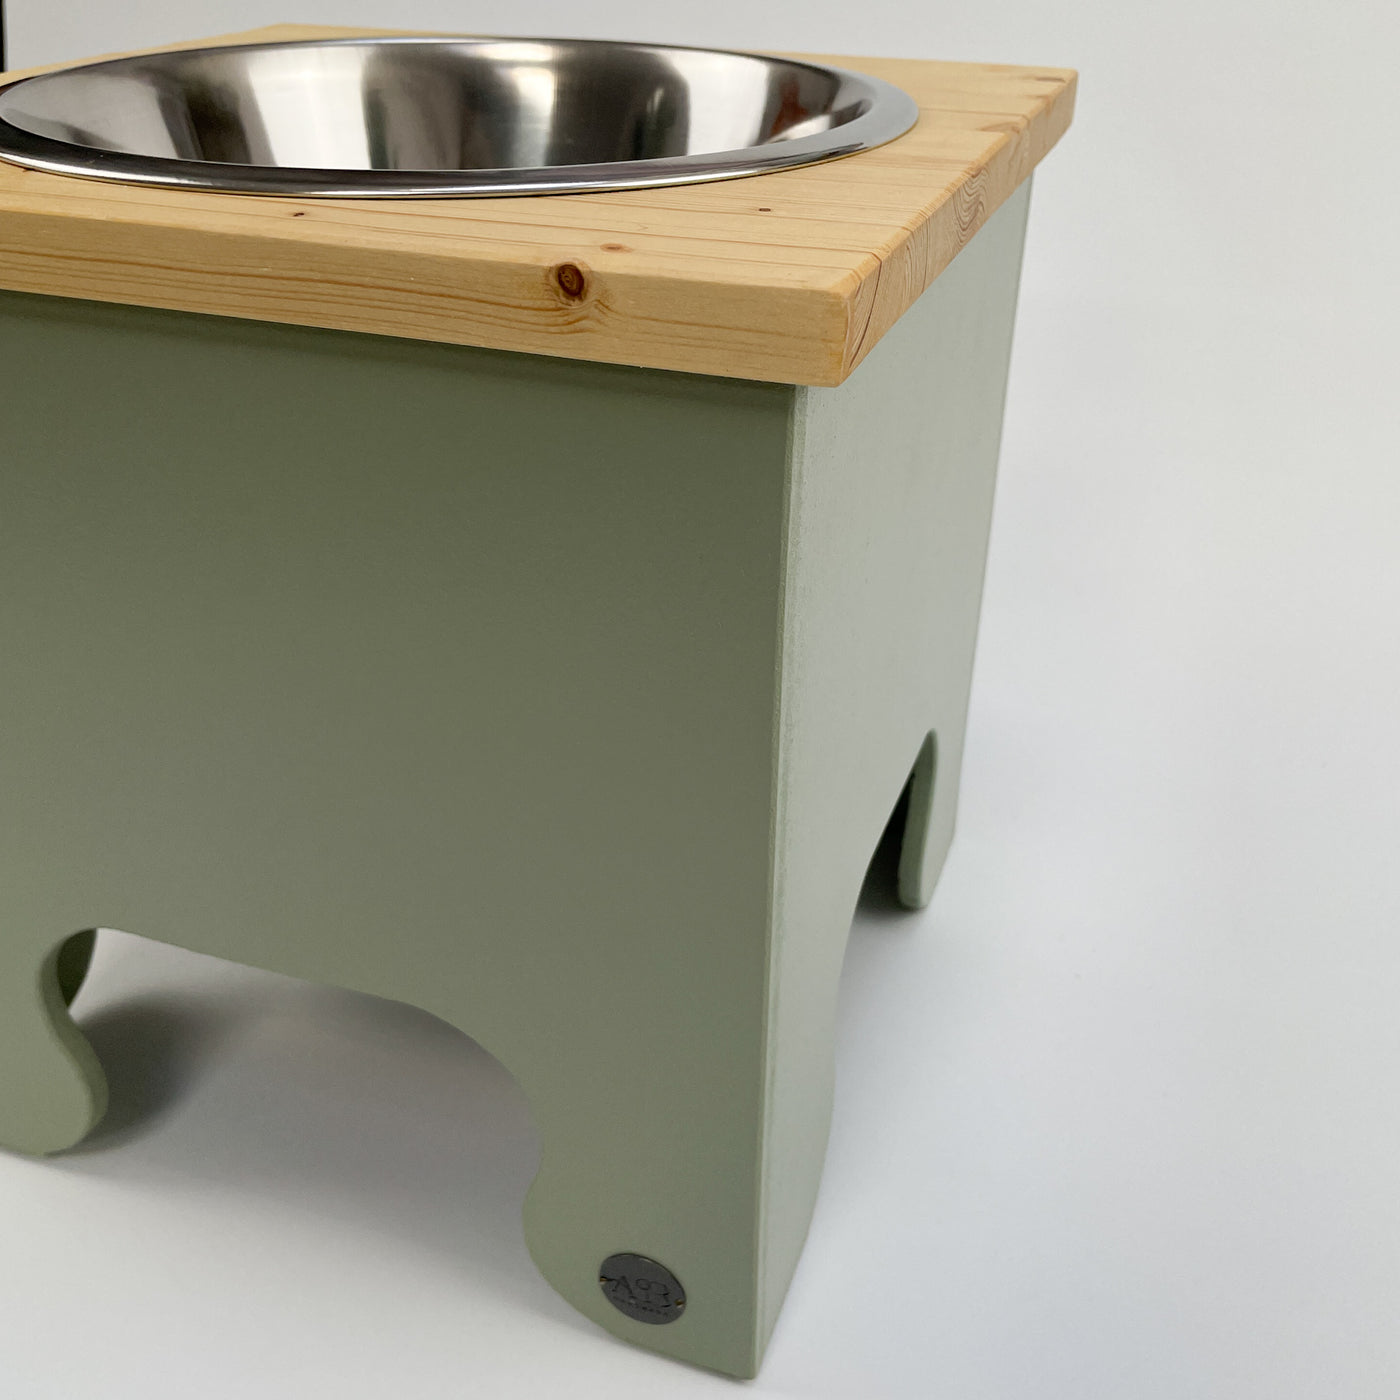 Dog Bowl Feeding Stand in soft green, natural pine top.